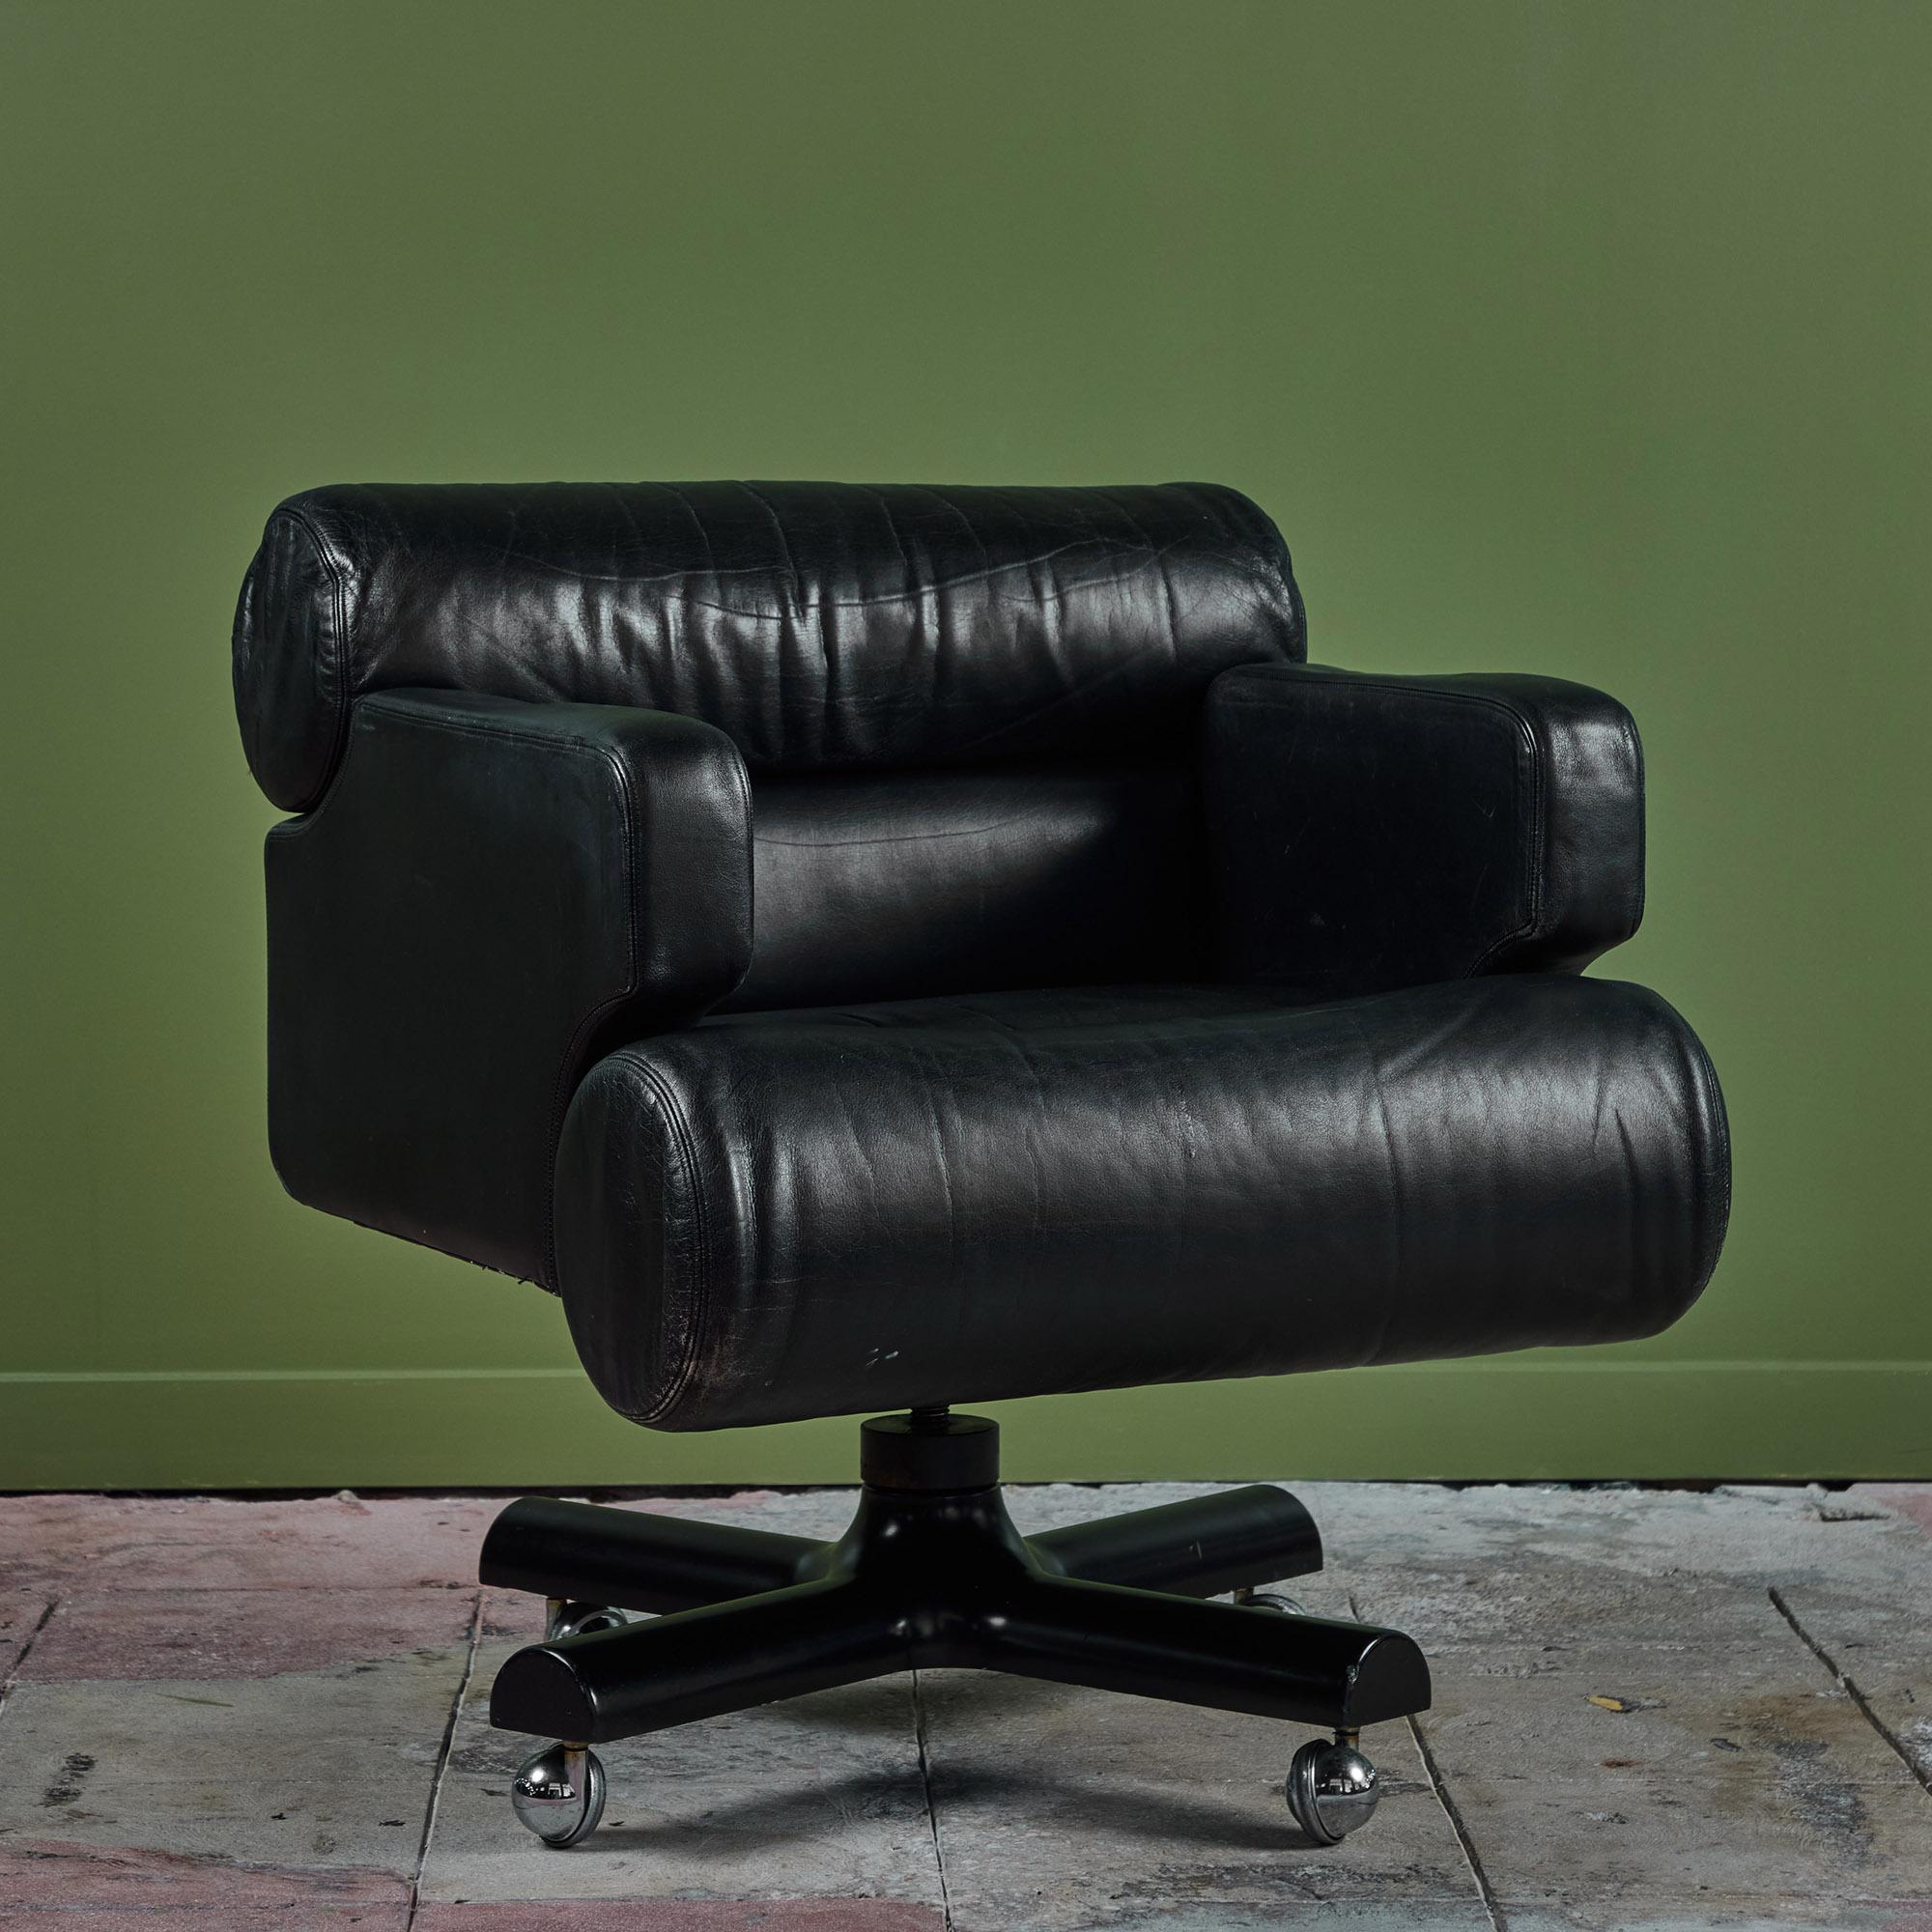 Executive desk chair by William Lancing Plumb for Marble Imperial Furniture, 1960's, USA. This plush desk chair features original black leather upholstery and cushions. The chair offers an adjustable seat height with a tilt swivel mechanism and sits